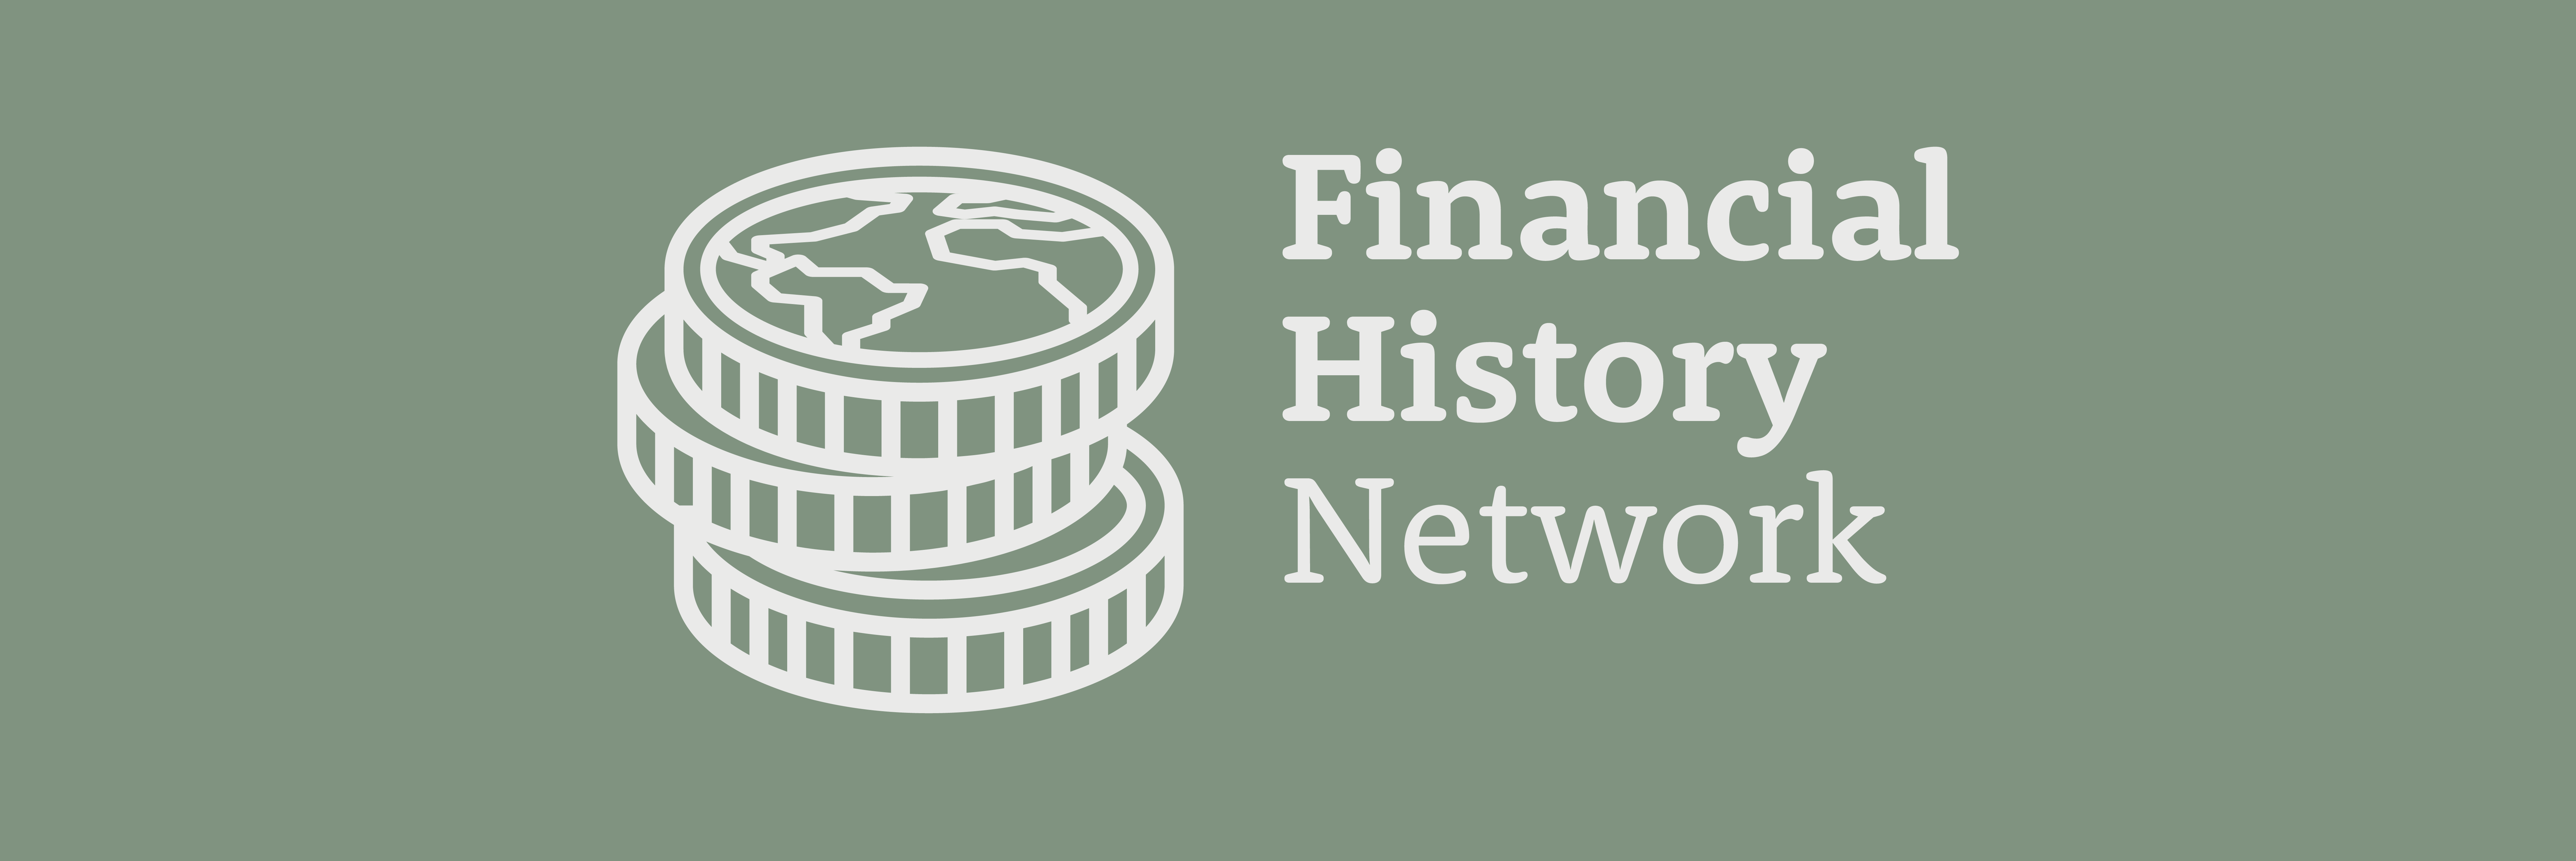 Financial History Network